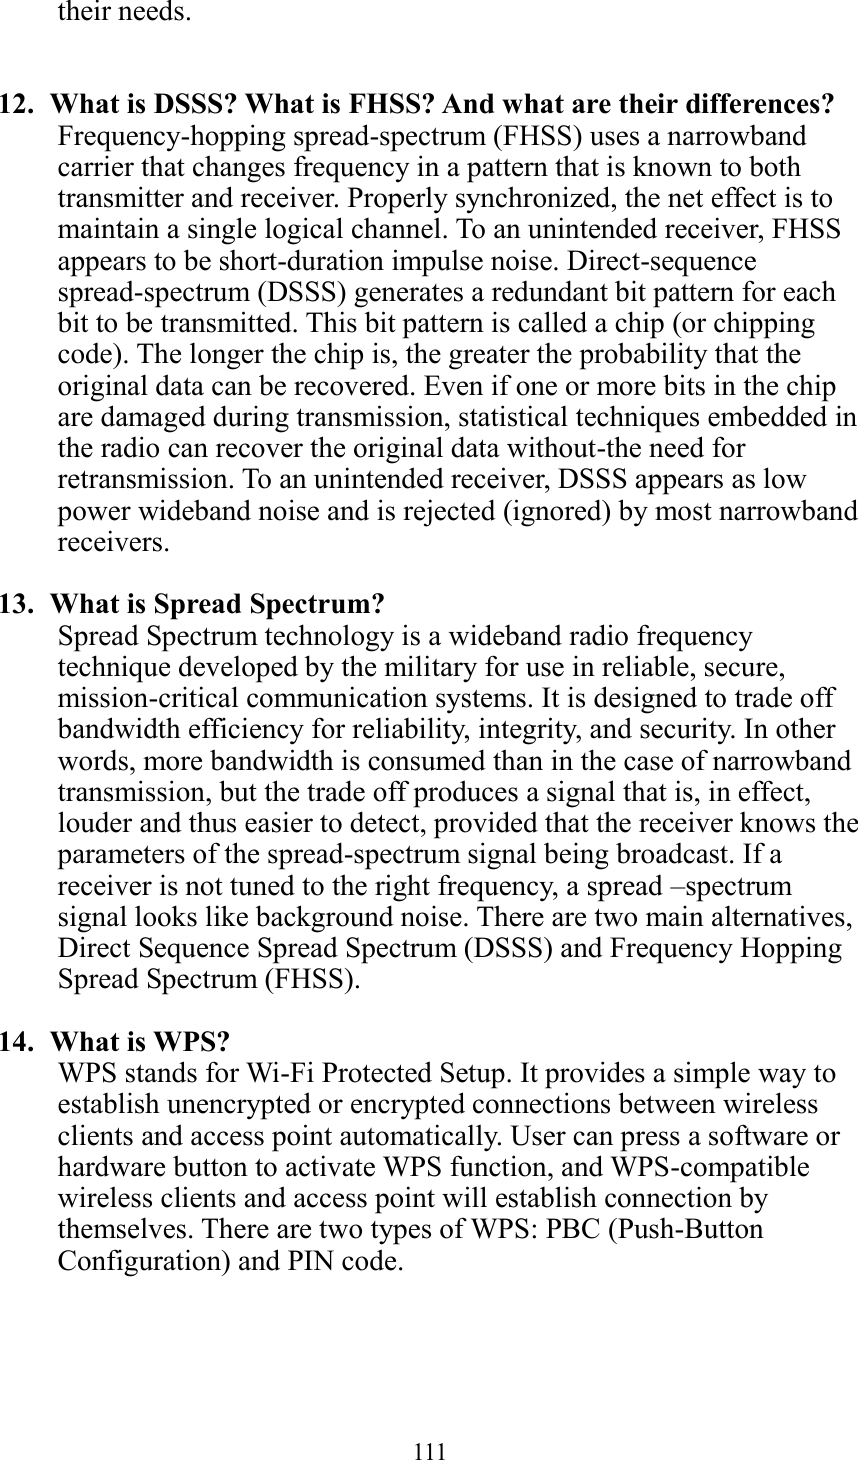  111  their needs.   12.   What is DSSS? What is FHSS? And what are their differences? Frequency-hopping spread-spectrum (FHSS) uses a narrowband carrier that changes frequency in a pattern that is known to both transmitter and receiver. Properly synchronized, the net effect is to maintain a single logical channel. To an unintended receiver, FHSS appears to be short-duration impulse noise. Direct-sequence spread-spectrum (DSSS) generates a redundant bit pattern for each bit to be transmitted. This bit pattern is called a chip (or chipping code). The longer the chip is, the greater the probability that the original data can be recovered. Even if one or more bits in the chip are damaged during transmission, statistical techniques embedded in the radio can recover the original data without-the need for retransmission. To an unintended receiver, DSSS appears as low power wideband noise and is rejected (ignored) by most narrowband receivers.  13.   What is Spread Spectrum? Spread Spectrum technology is a wideband radio frequency technique developed by the military for use in reliable, secure, mission-critical communication systems. It is designed to trade off bandwidth efficiency for reliability, integrity, and security. In other words, more bandwidth is consumed than in the case of narrowband transmission, but the trade off produces a signal that is, in effect, louder and thus easier to detect, provided that the receiver knows the parameters of the spread-spectrum signal being broadcast. If a receiver is not tuned to the right frequency, a spread –spectrum signal looks like background noise. There are two main alternatives, Direct Sequence Spread Spectrum (DSSS) and Frequency Hopping Spread Spectrum (FHSS).  14.   What is WPS? WPS stands for Wi-Fi Protected Setup. It provides a simple way to establish unencrypted or encrypted connections between wireless clients and access point automatically. User can press a software or hardware button to activate WPS function, and WPS-compatible wireless clients and access point will establish connection by themselves. There are two types of WPS: PBC (Push-Button Configuration) and PIN code. 